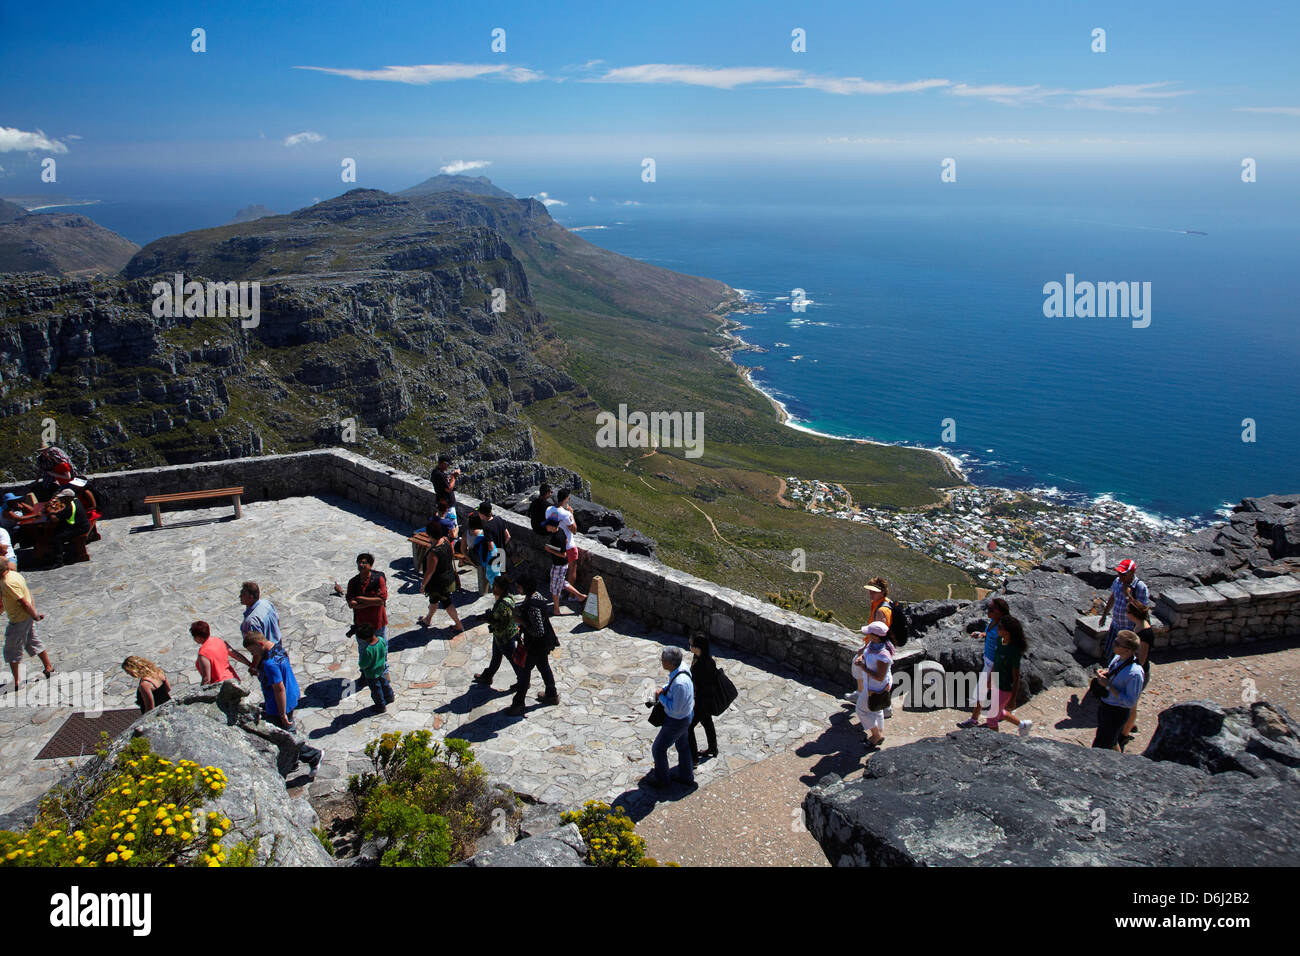 Tourists at viewpoint on Table Mountain, overlooking the Twelve Apostles and Atlantic Seaboard, Cape Town, South Africa Stock Photo